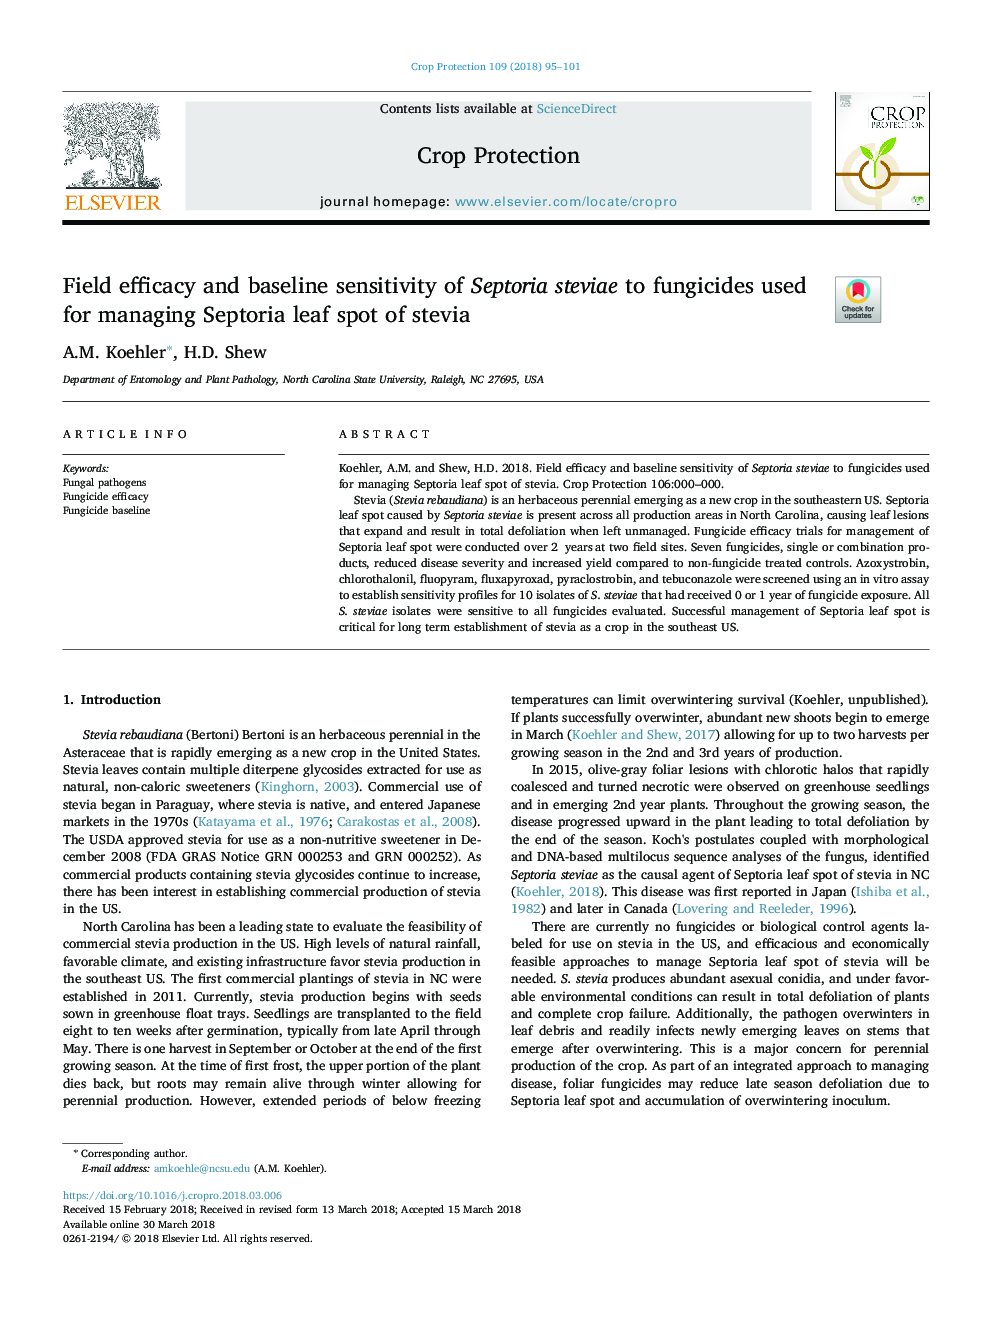 Field efficacy and baseline sensitivity of Septoria steviae to fungicides used for managing Septoria leaf spot of stevia